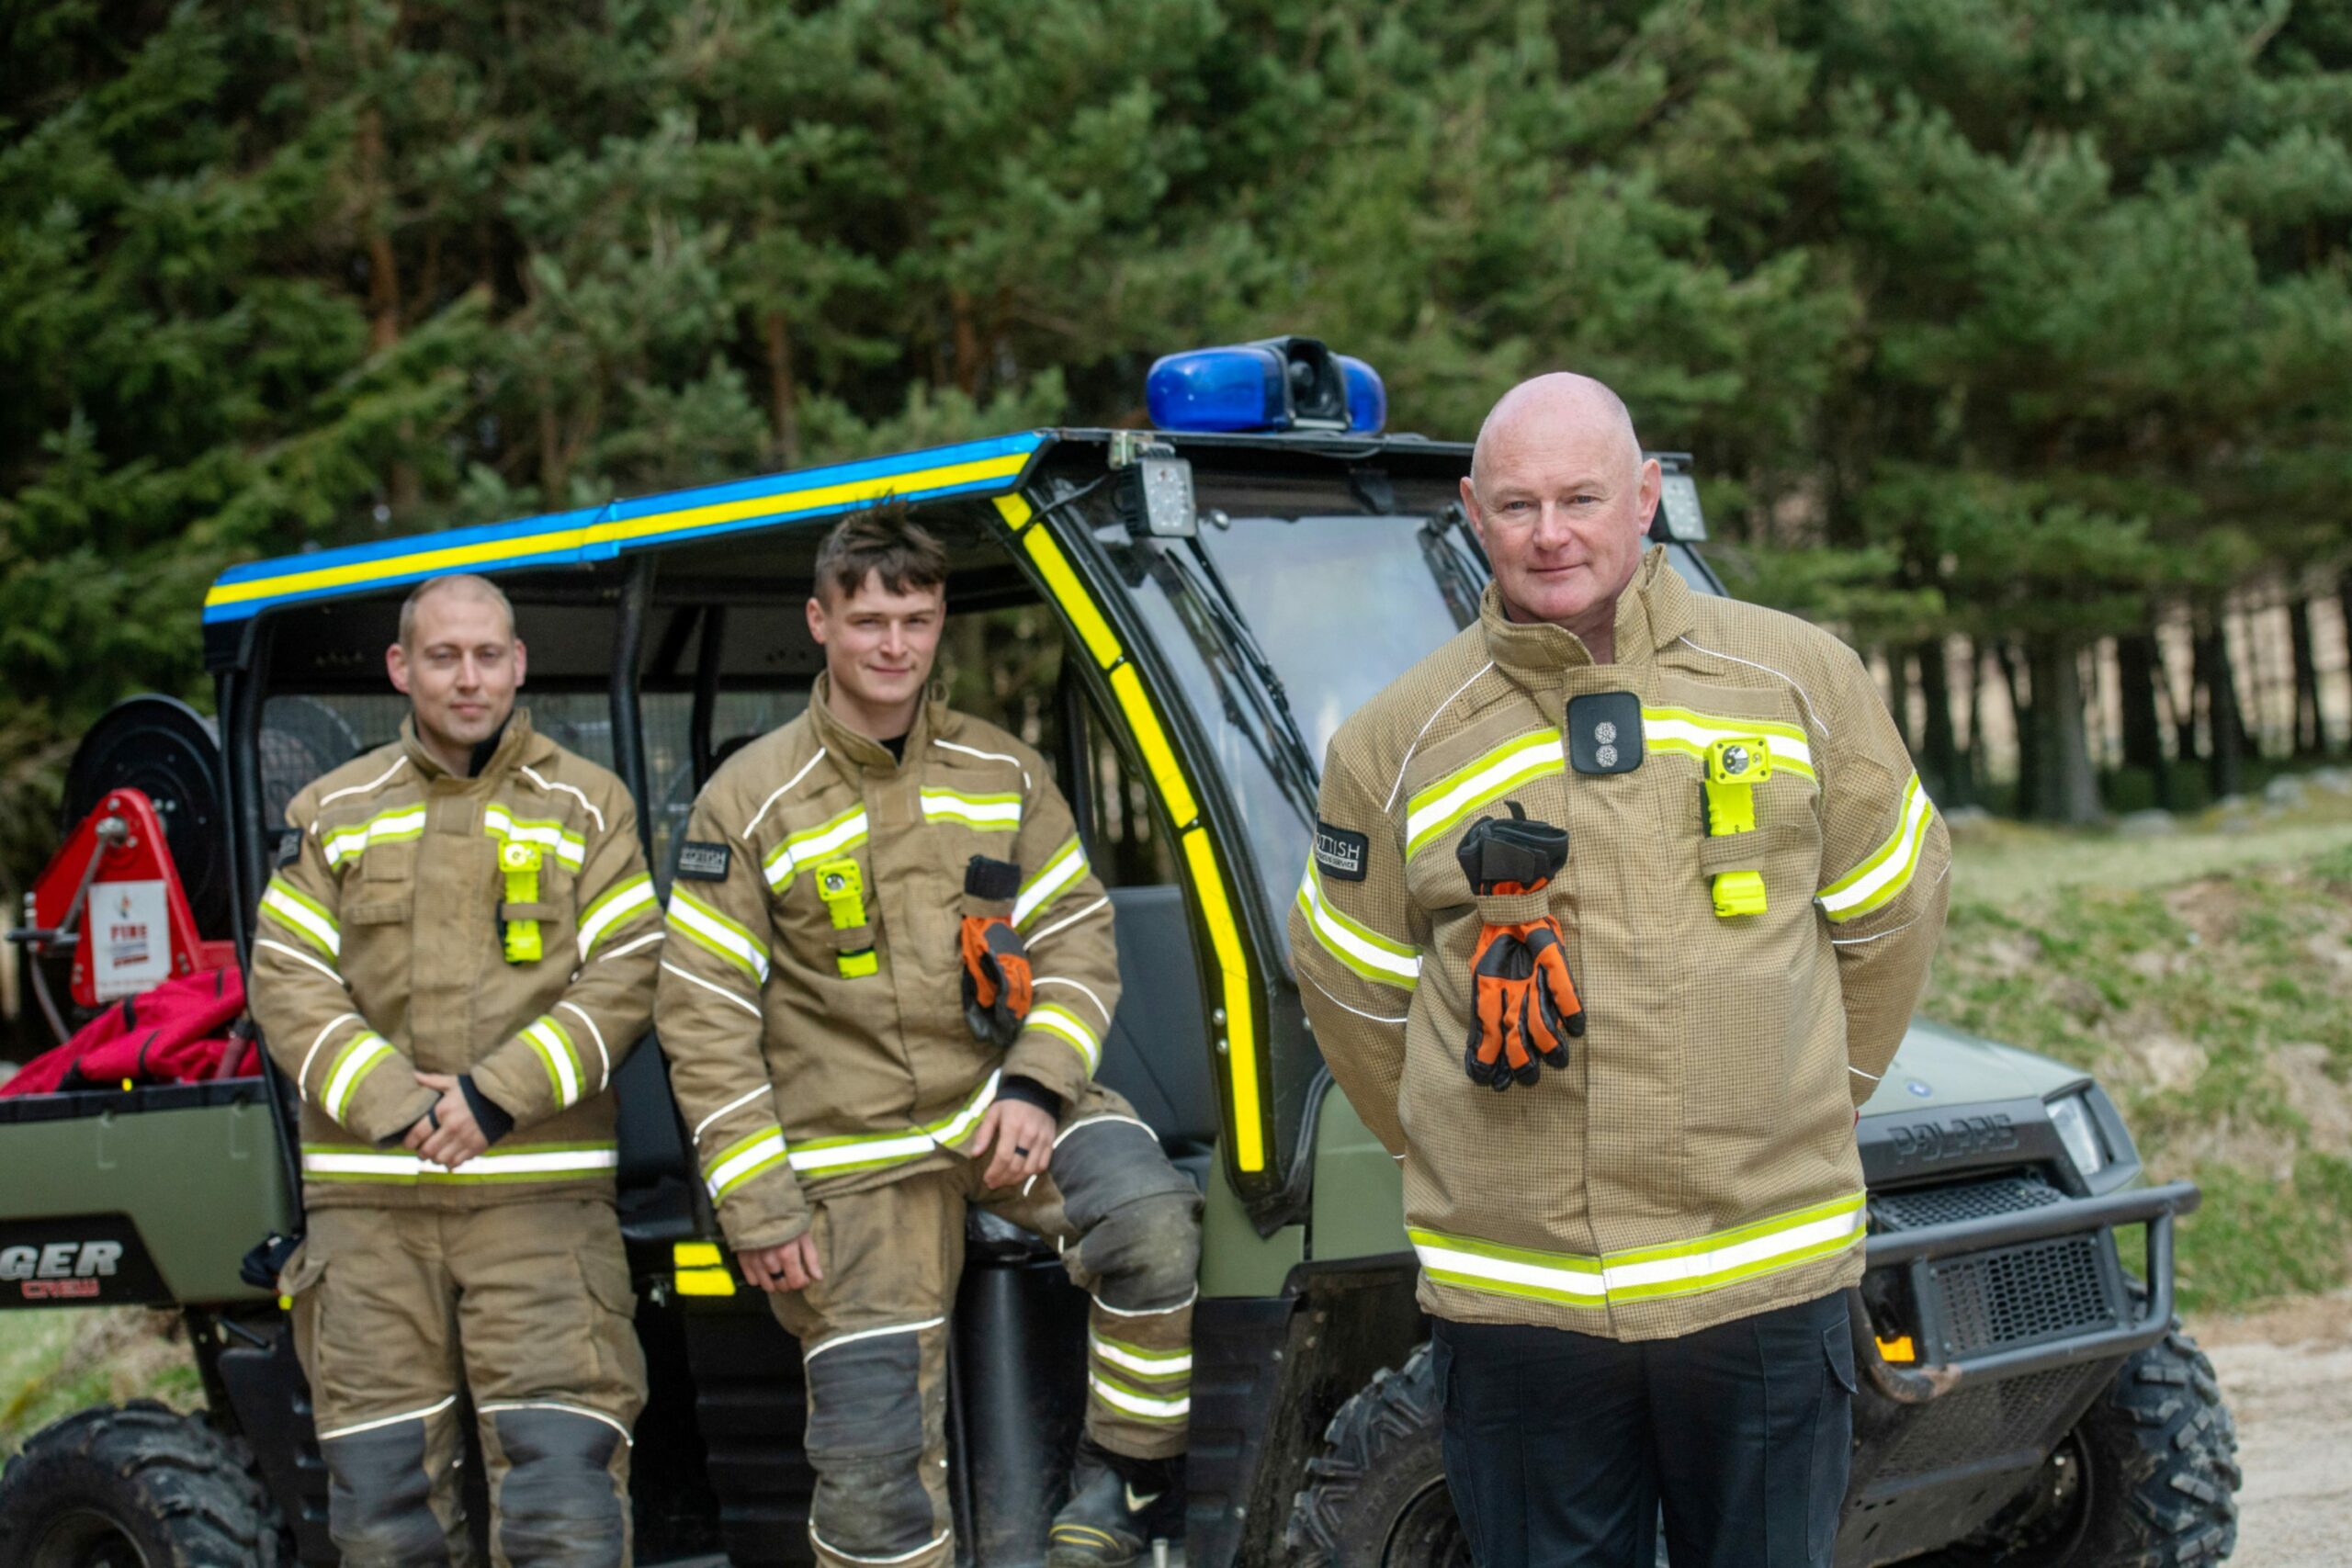 Alex Rouse, Jack O'Halloran and David Murray, Crew Commander at Ballater Fire Station.